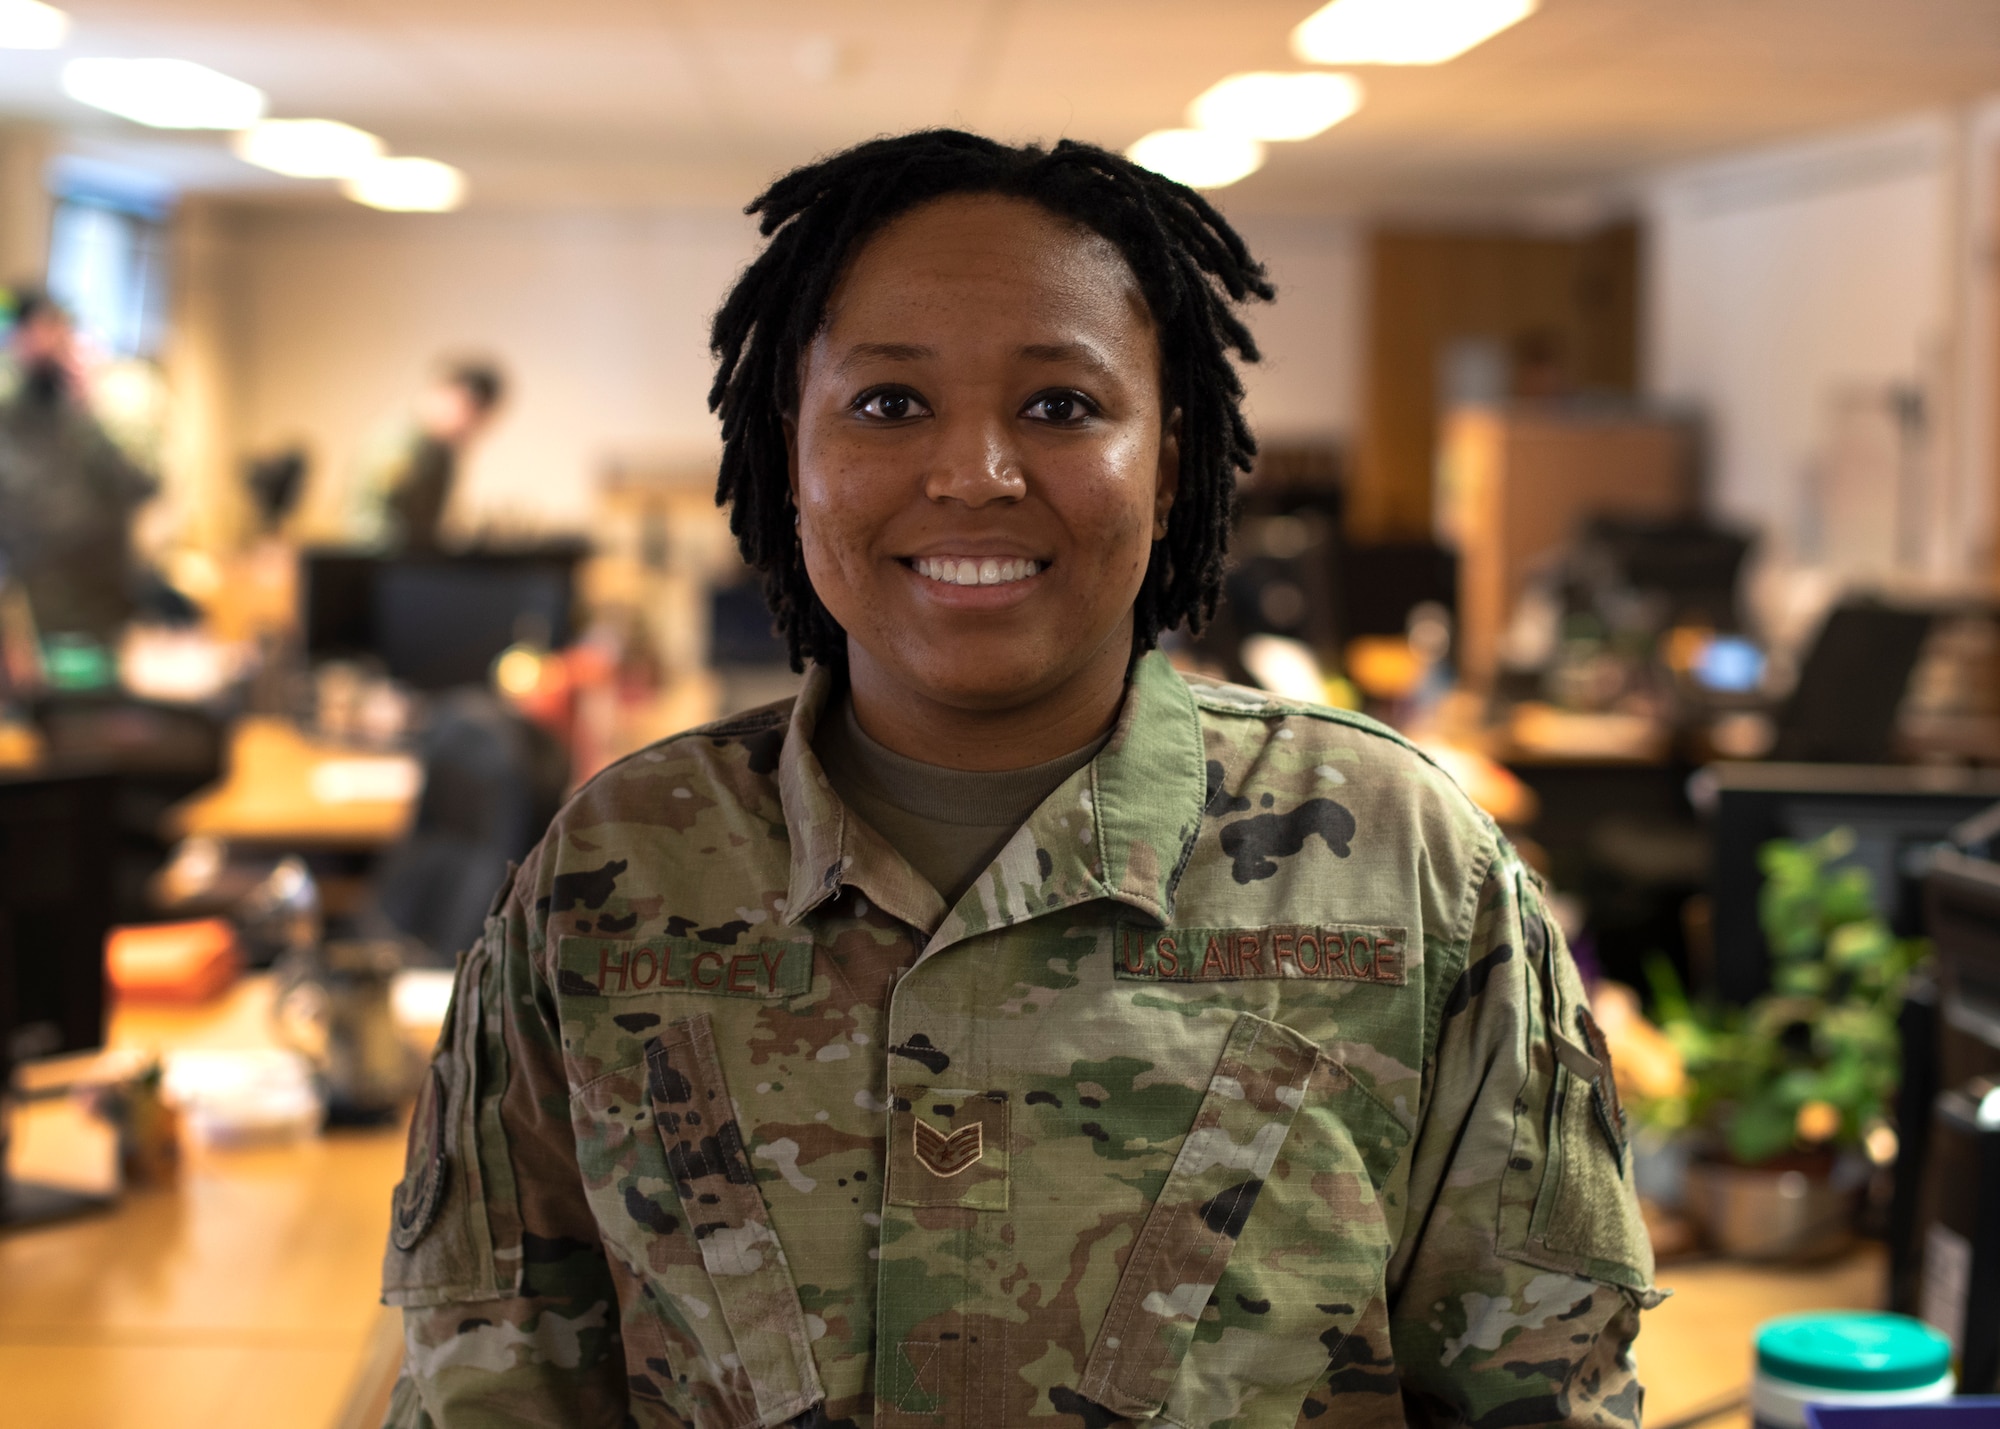 U.S. Air Force Staff Sgt. Jasmine Holcey, 786th Force Support Squadron relocations supervisor, poses for a photo in the base relocations office at Ramstein Air Base, Germany, June 1, 2020.